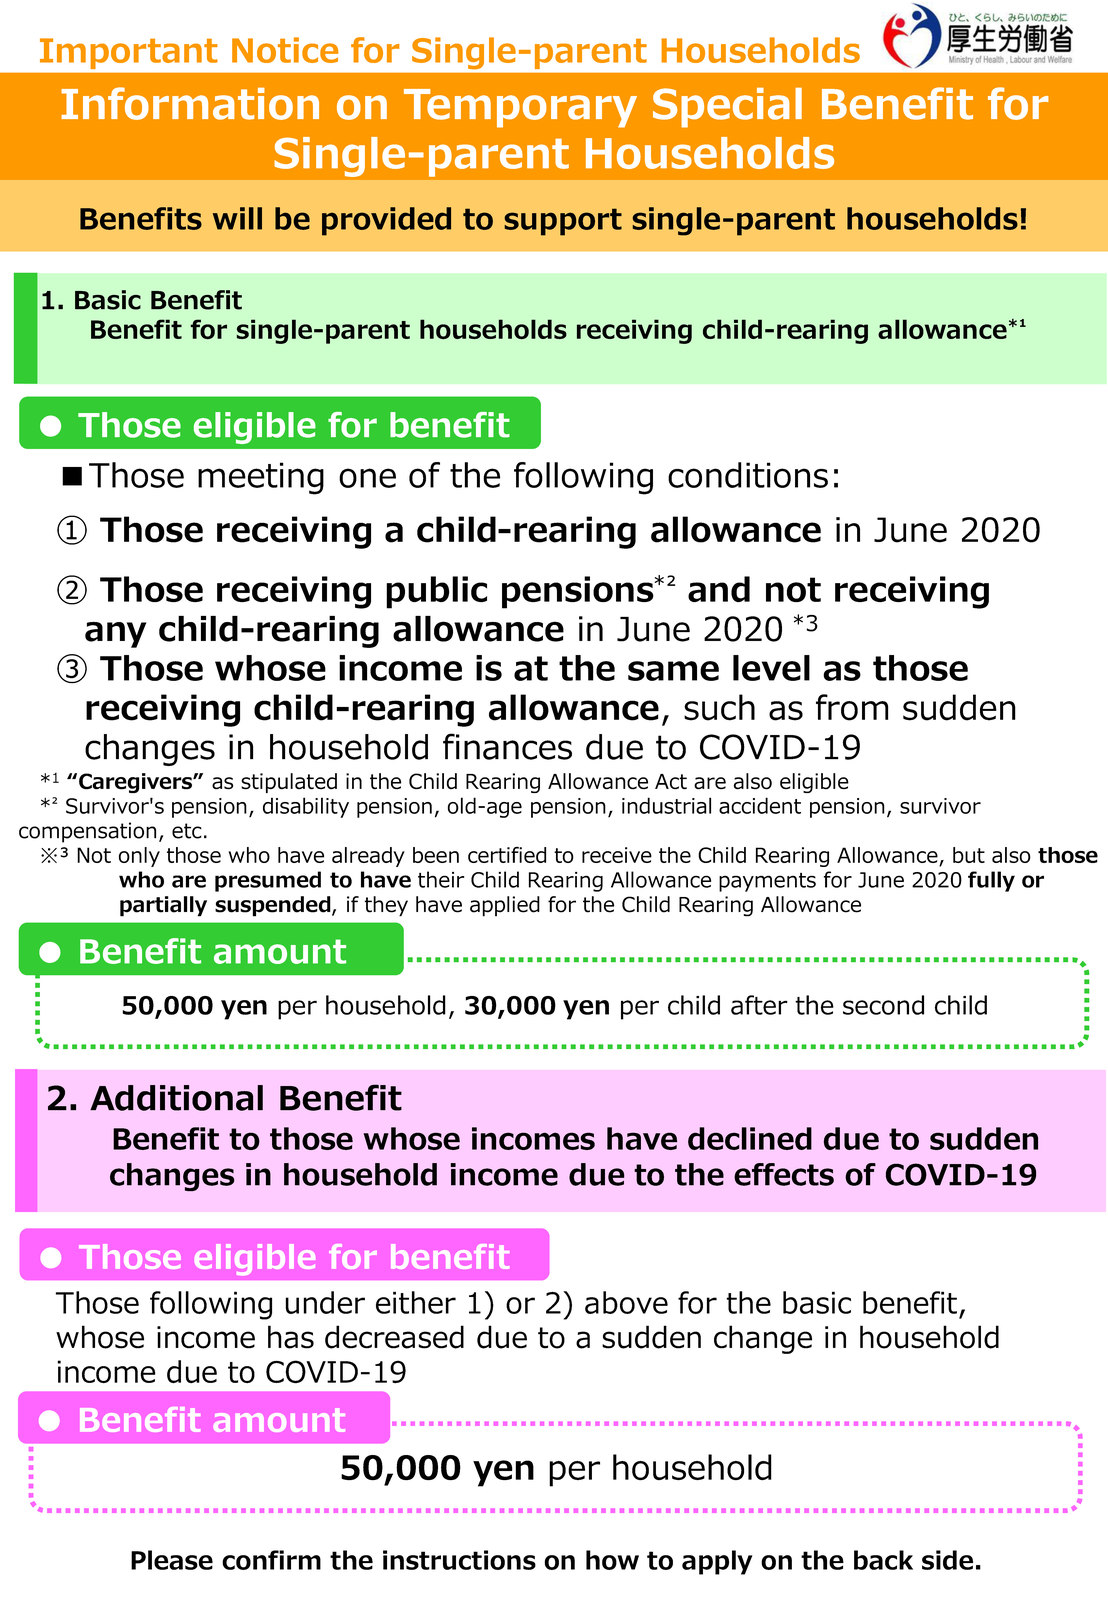 Information on Temporary Special Benefit for Single-parent Households1